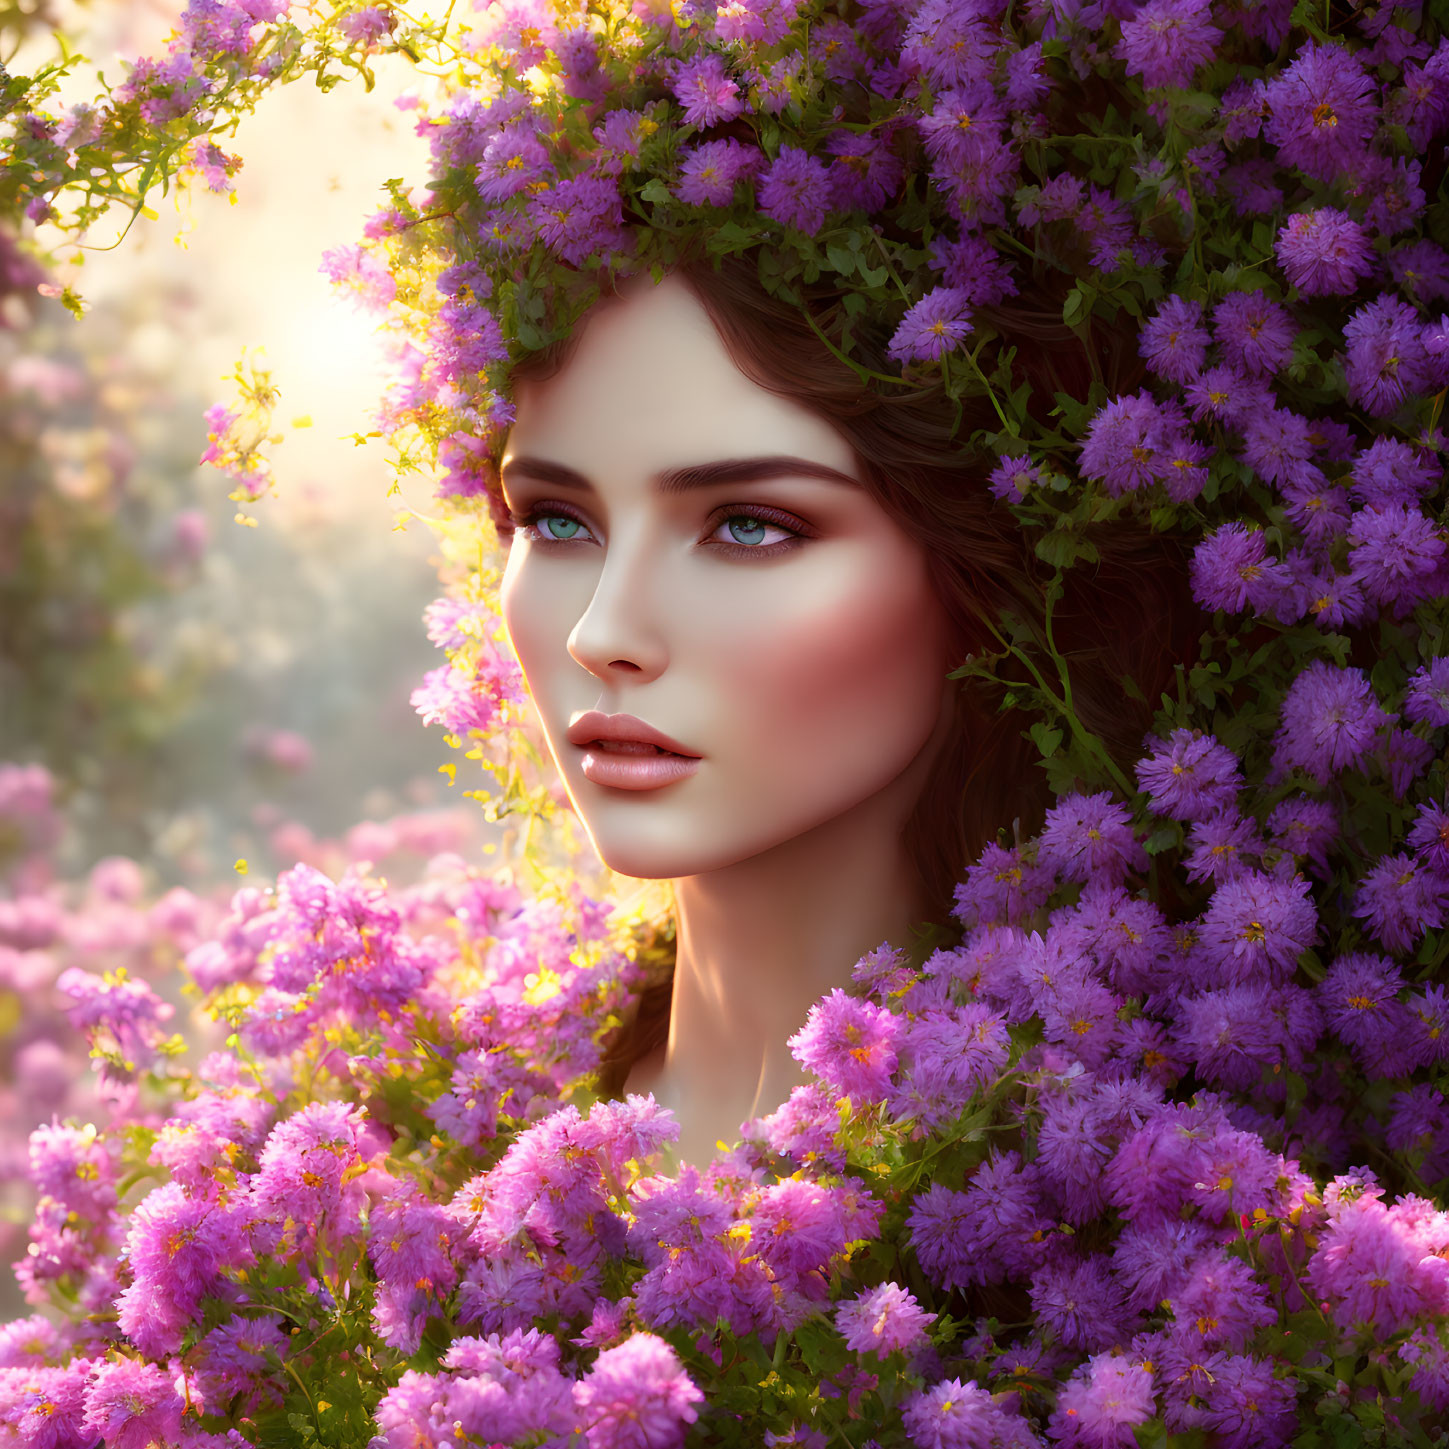 Digital Illustration: Woman with Purple Flower Crown in Magical Setting